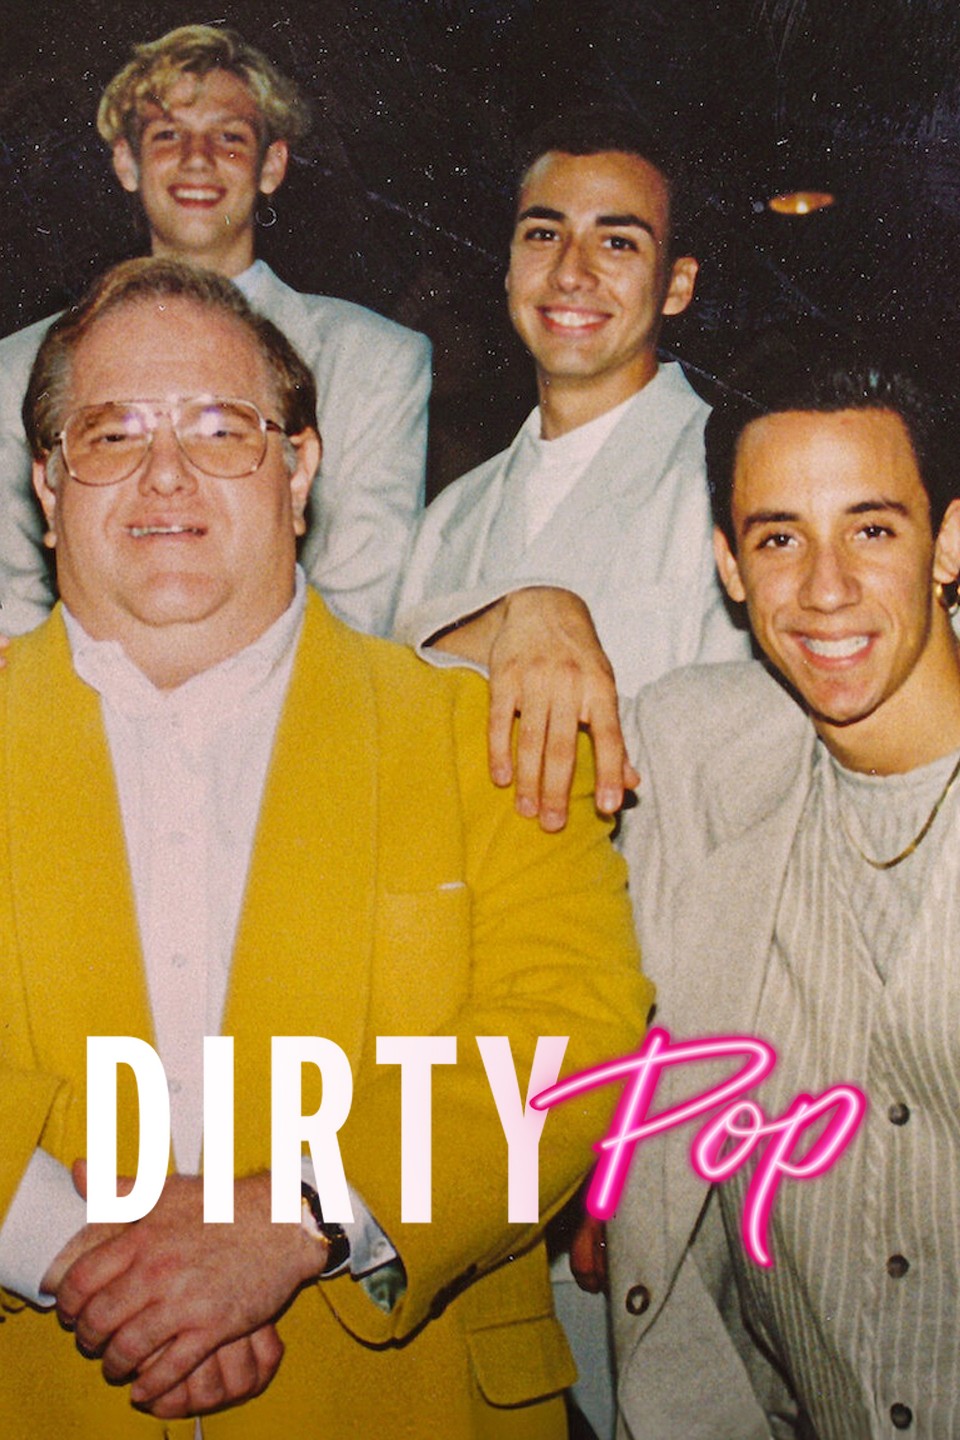 Dirty Pop: The Boy Band Scam (S01)